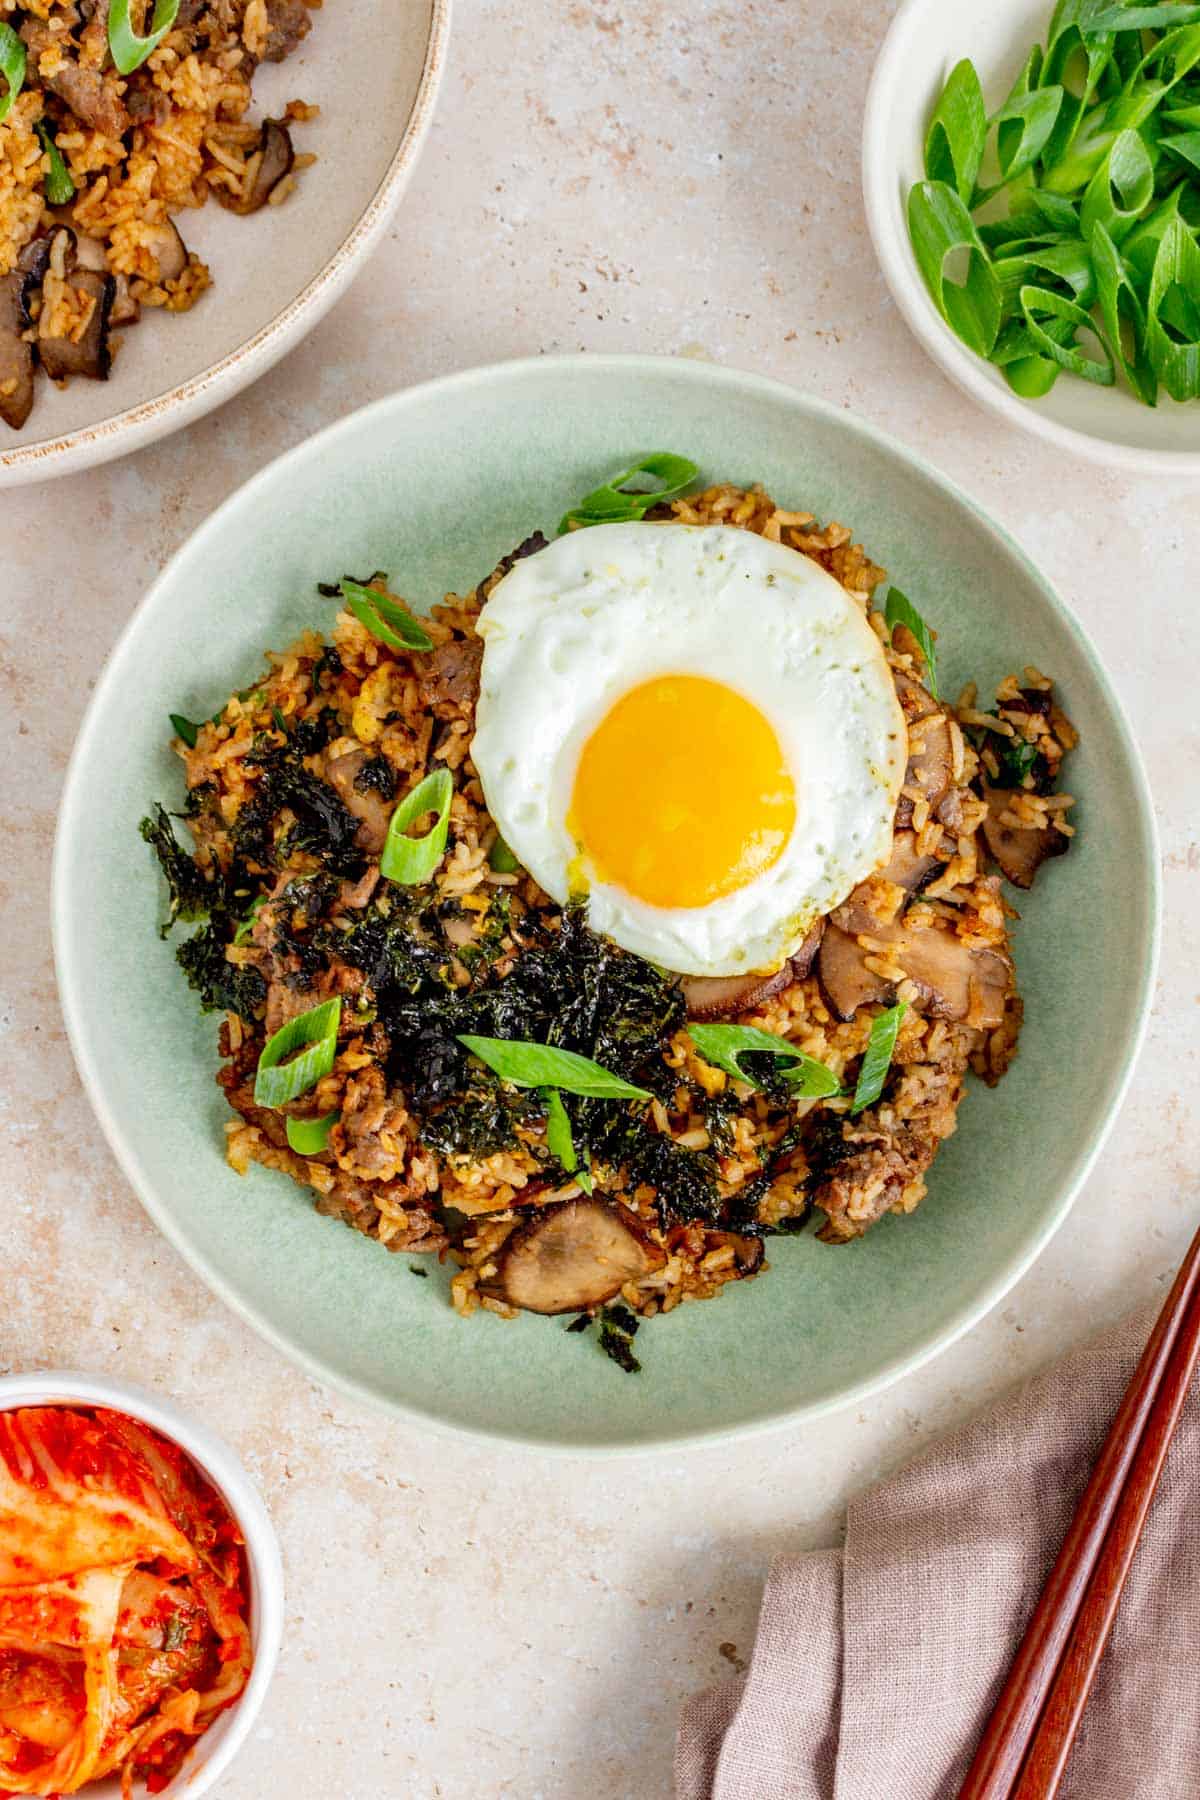 An overhead view of a plate of bulgogi fried rice topped with seaweed and a fried egg.